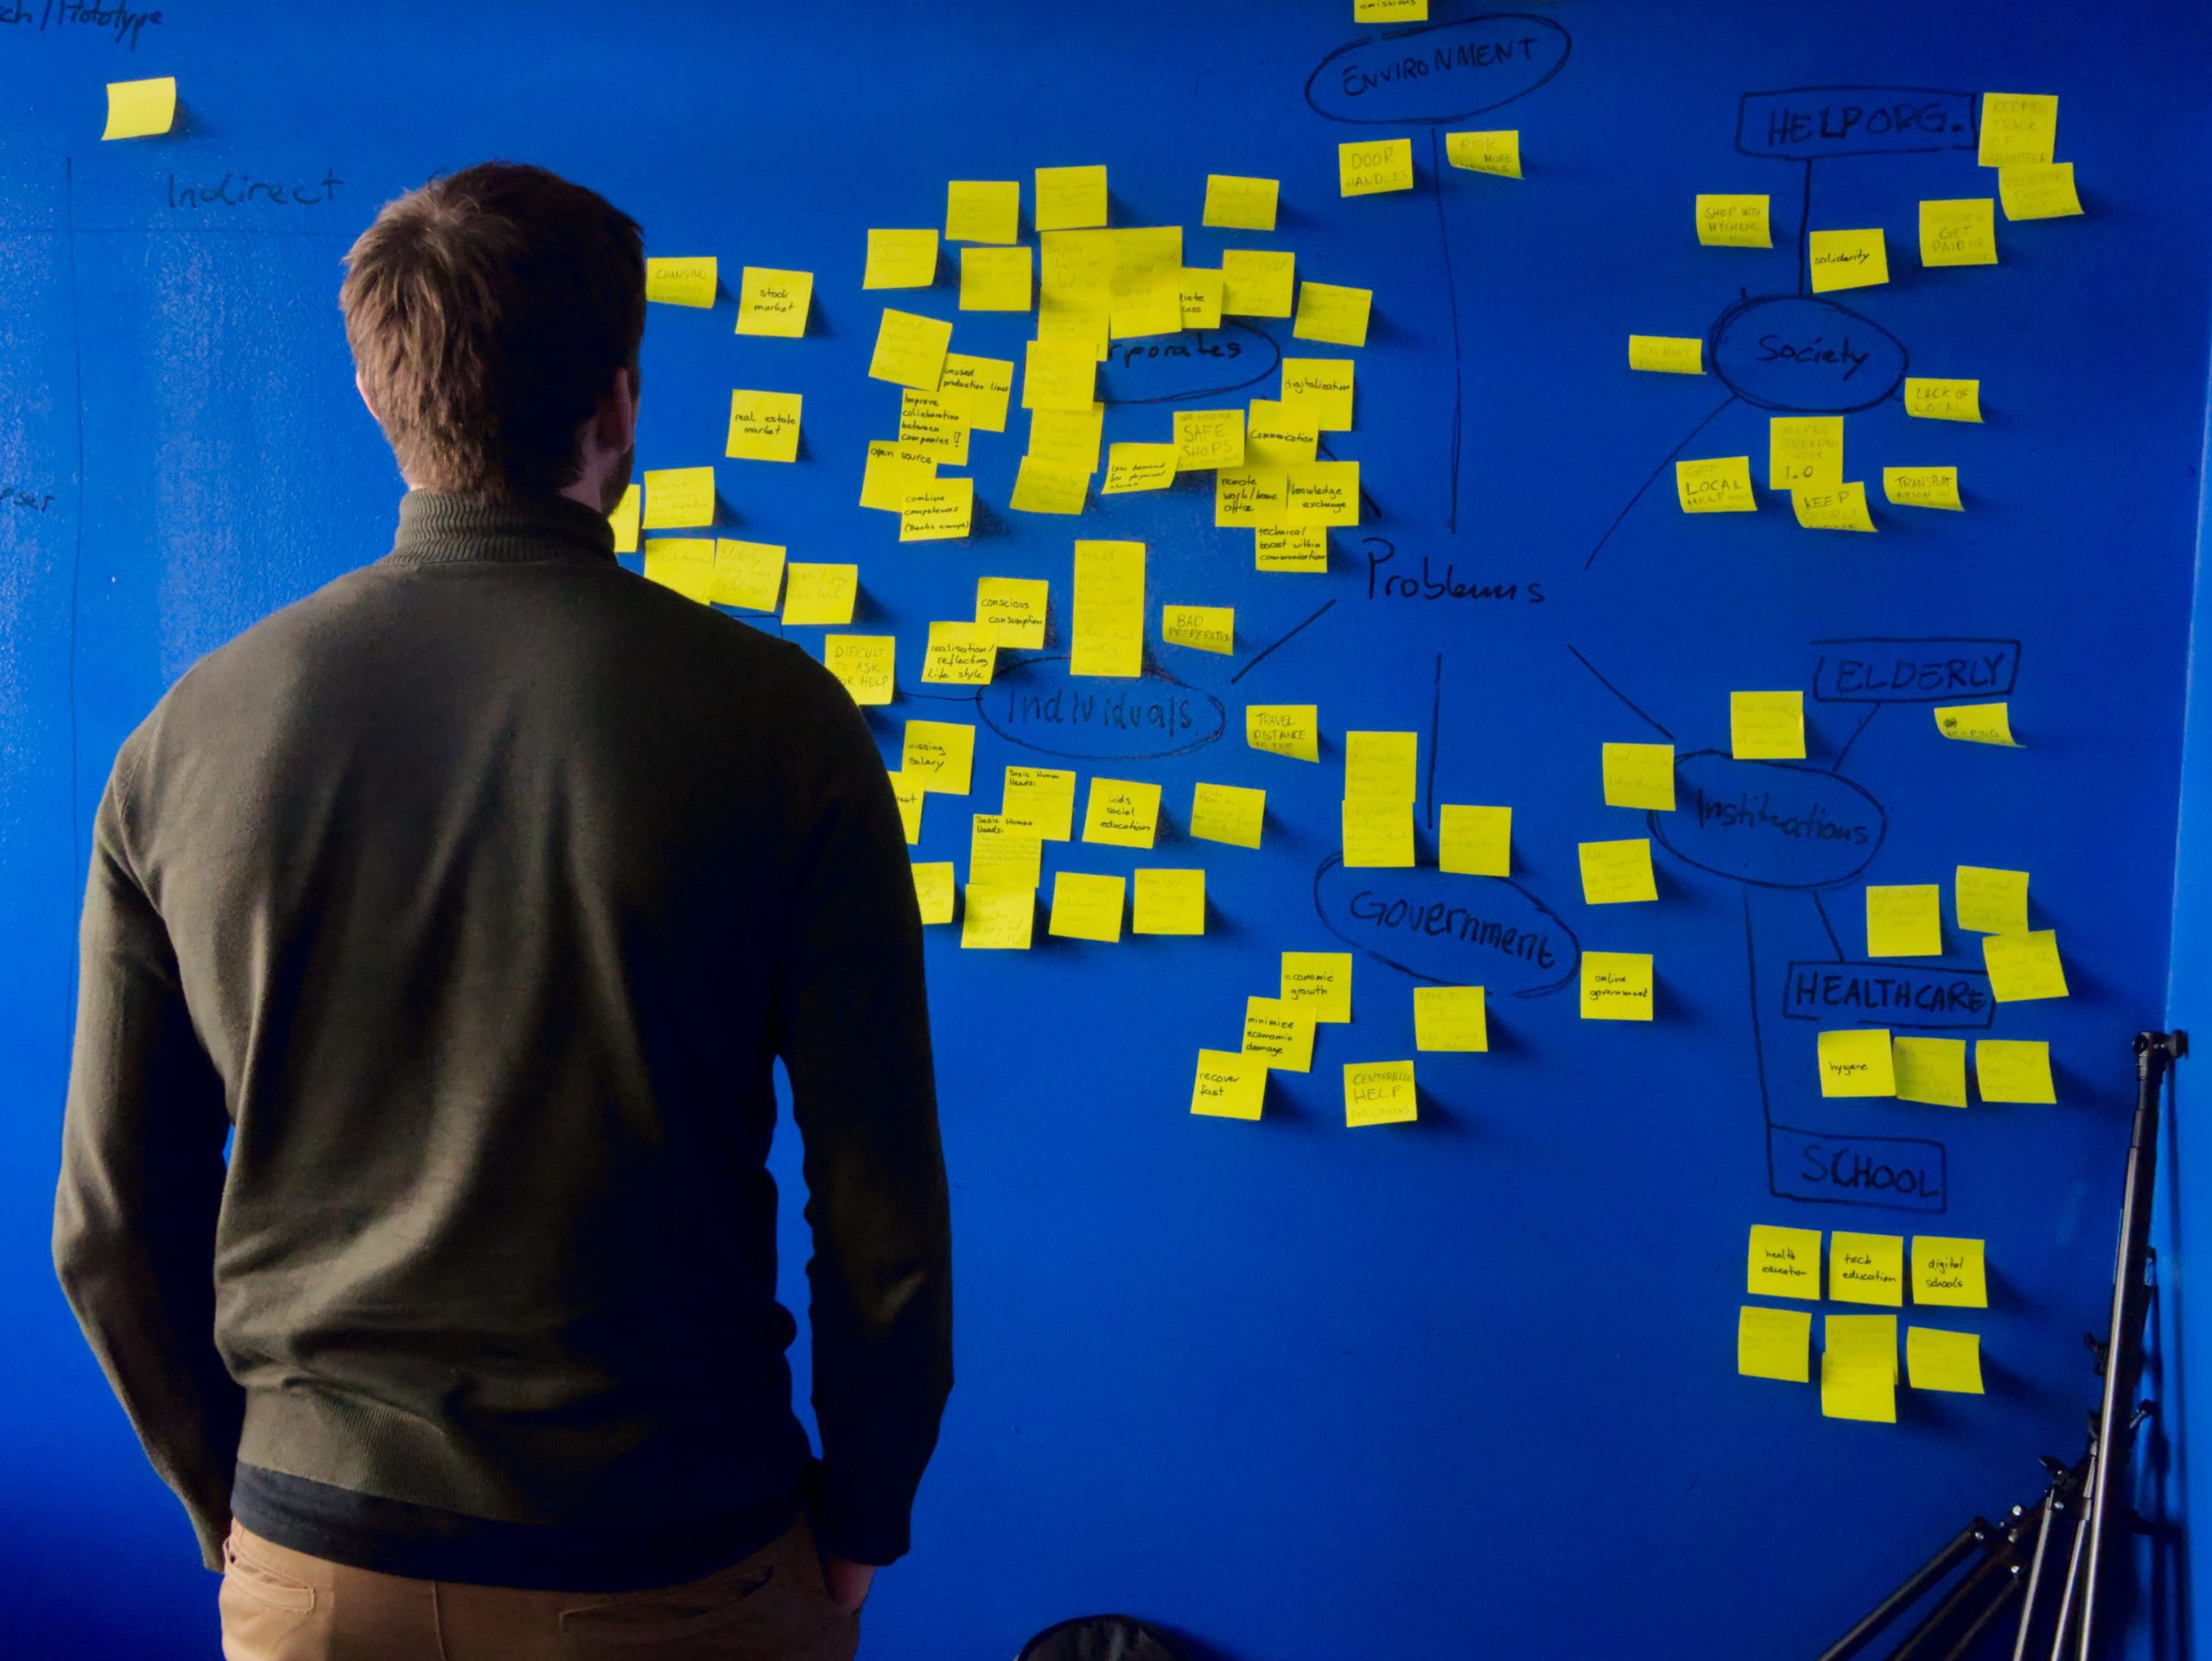 Image shows a person thinkng about a startup and staring at a wall covered in yellow post-it notes. Photo courtesy Geekdom.